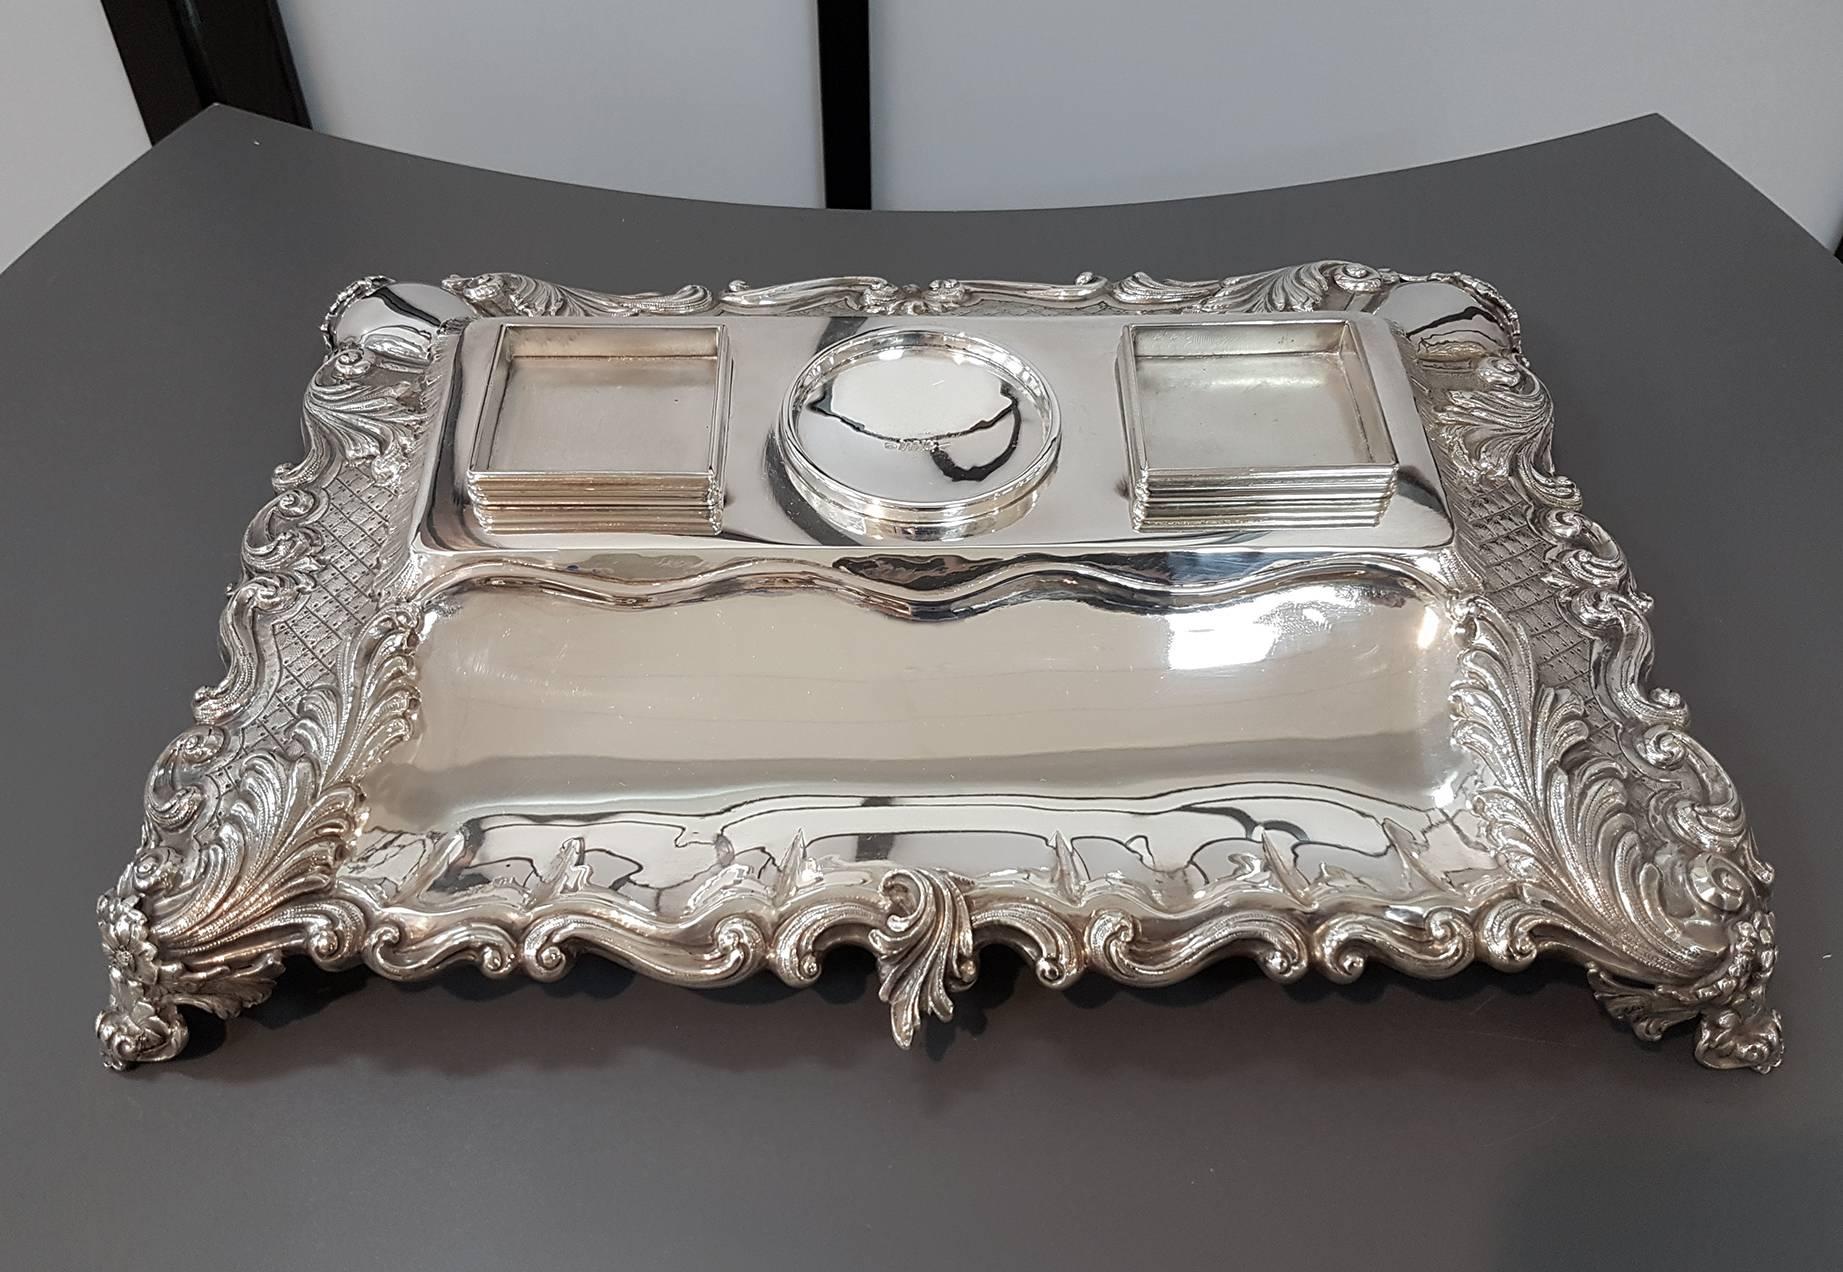 Hand-Crafted 20th Century Italian Sterling Silver Inkstand, hHandicraft made in Italy For Sale